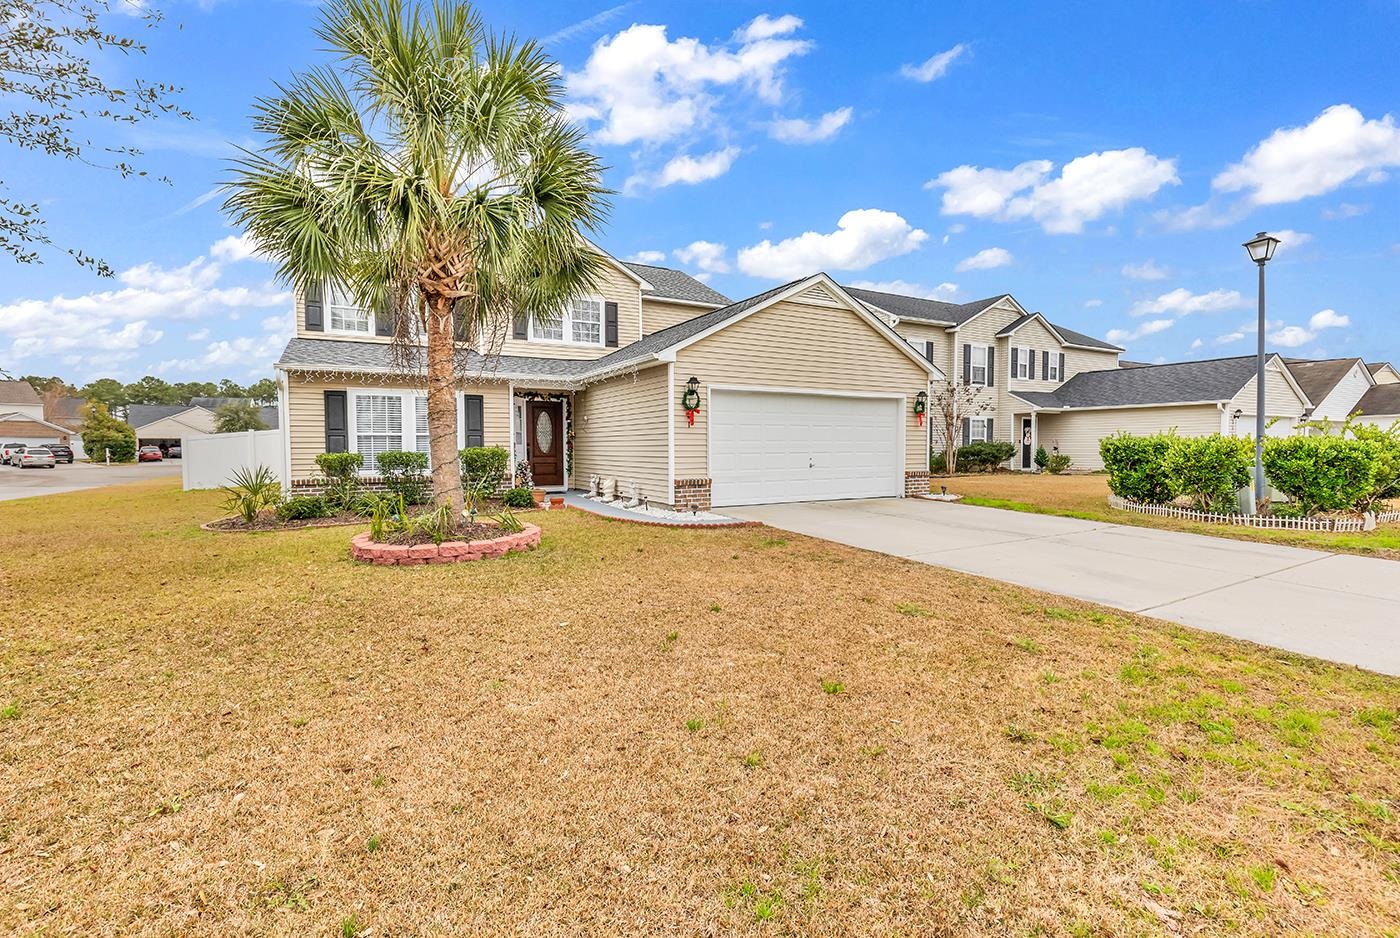 151 Weeping Willow Dr. Myrtle Beach, SC 29579